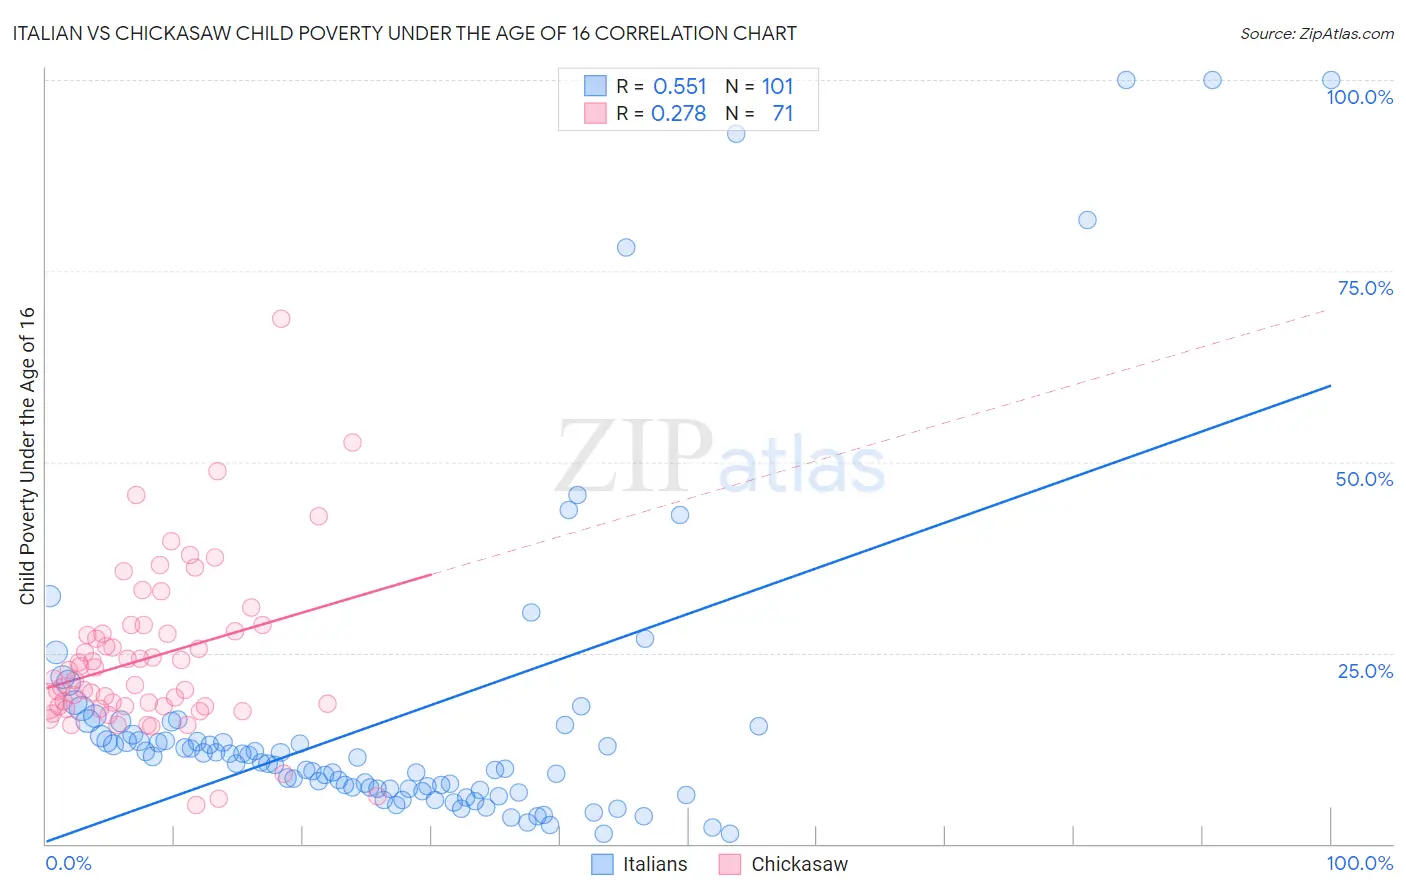 Italian vs Chickasaw Child Poverty Under the Age of 16